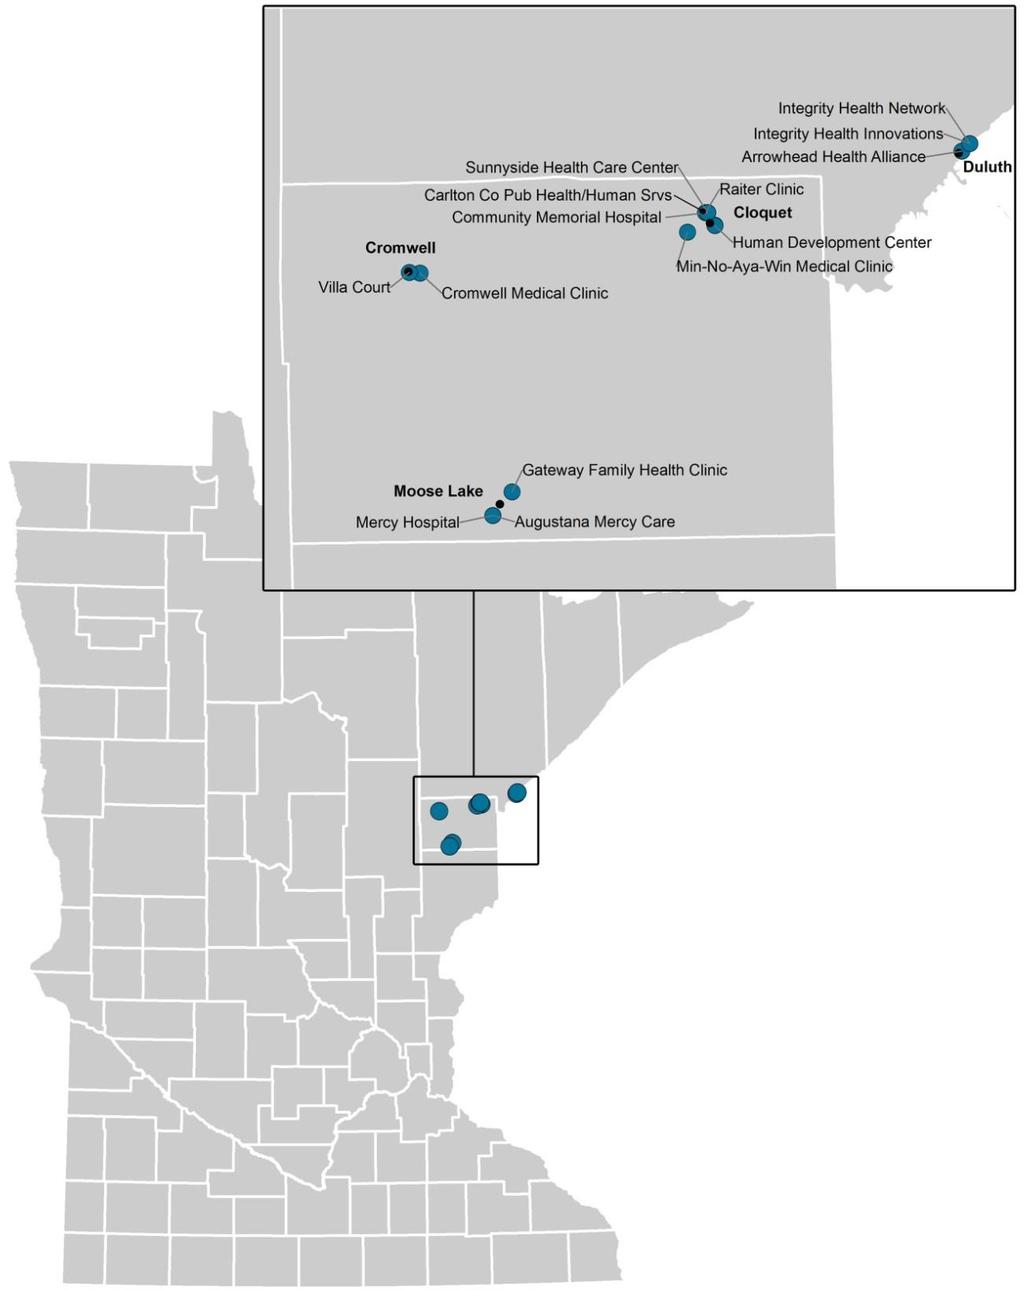 Development Grants 1. Carlton County Connects Note: Plotted organizations may overlap because they are in close proximity.